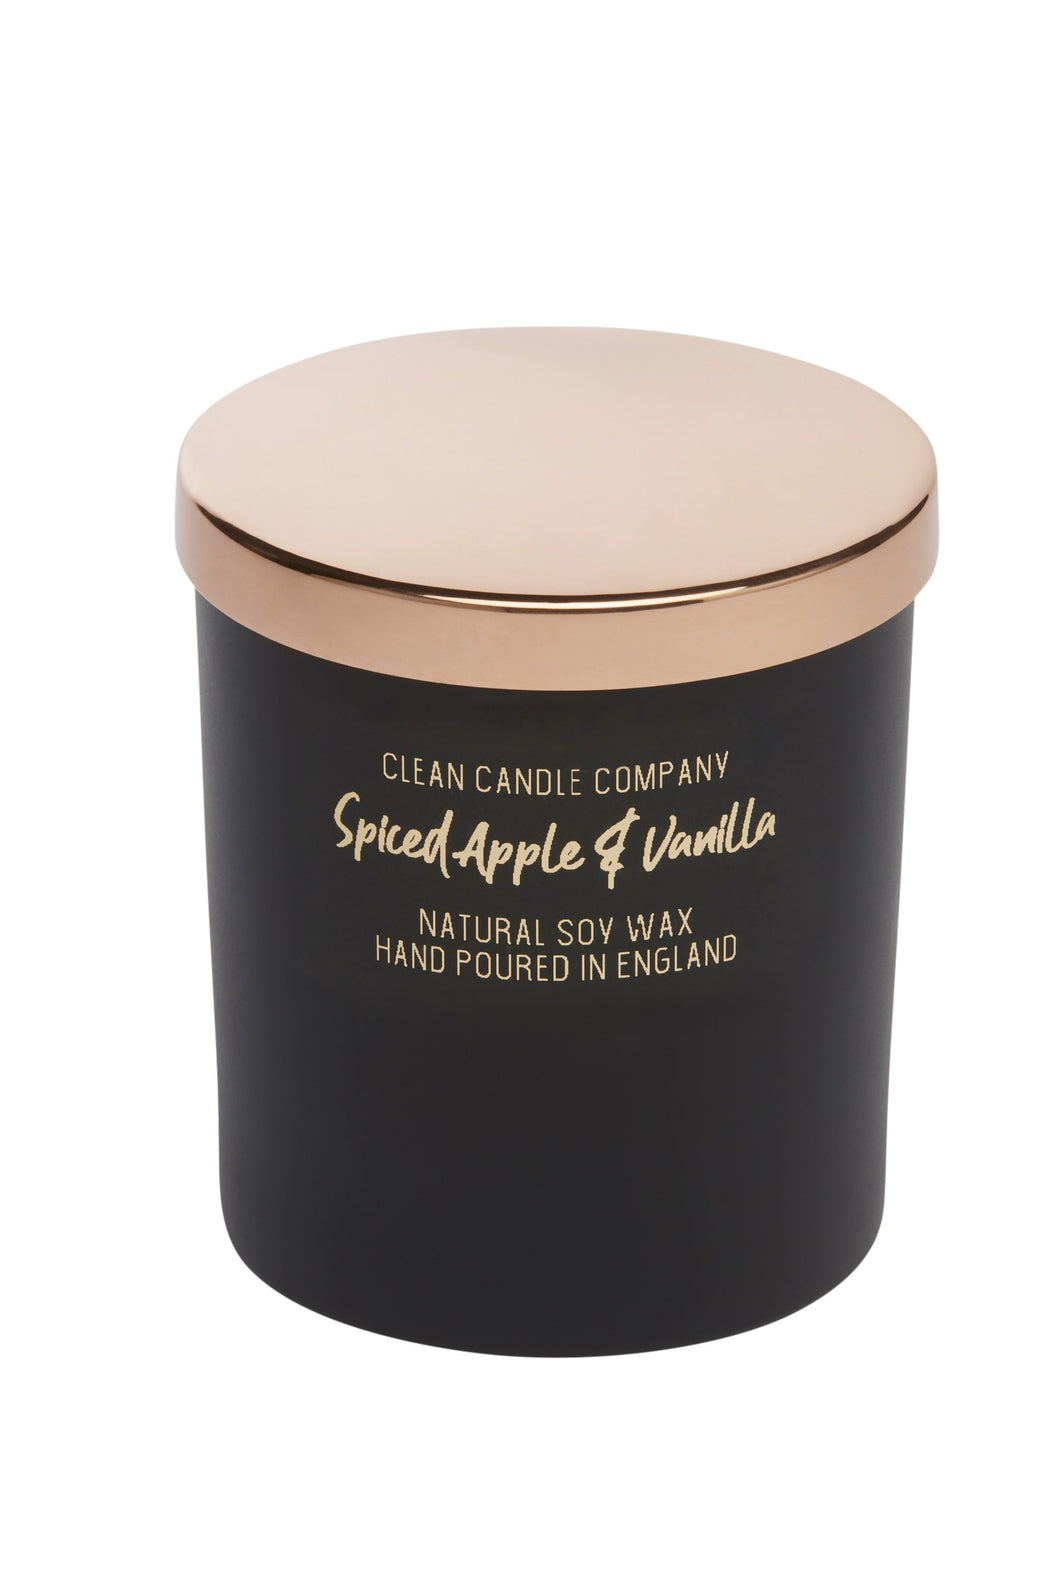 Christmas Spiced Apple & Vanilla Soy Wax Candle in Black Glass Jar with Rose Gold Lid